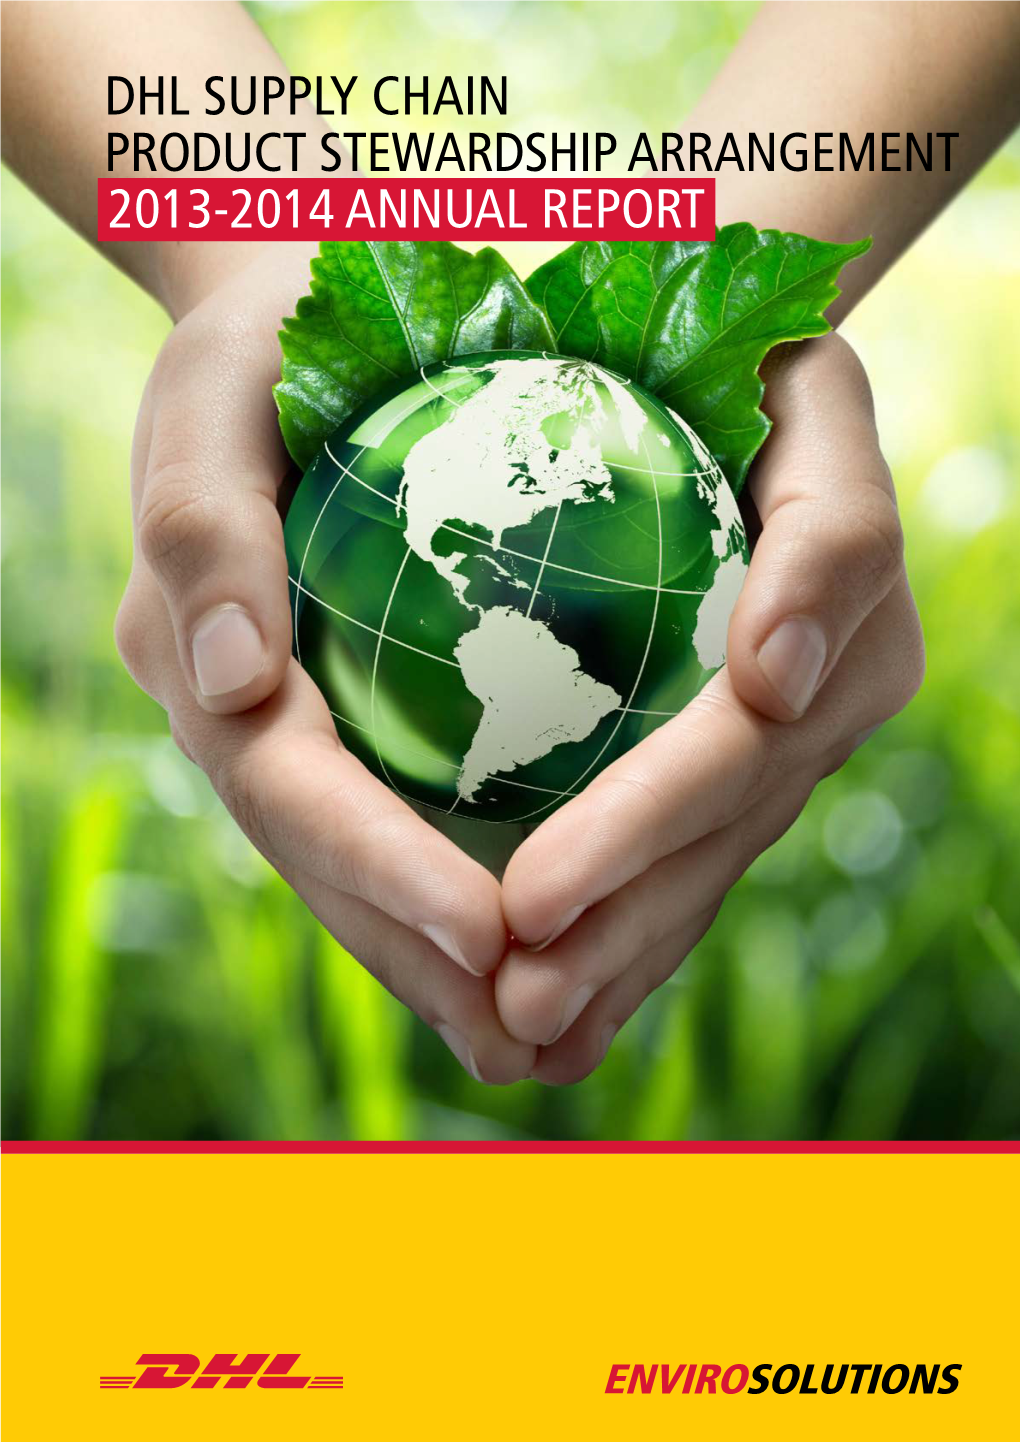 DHL Supply Chain Annual Report 2013-14